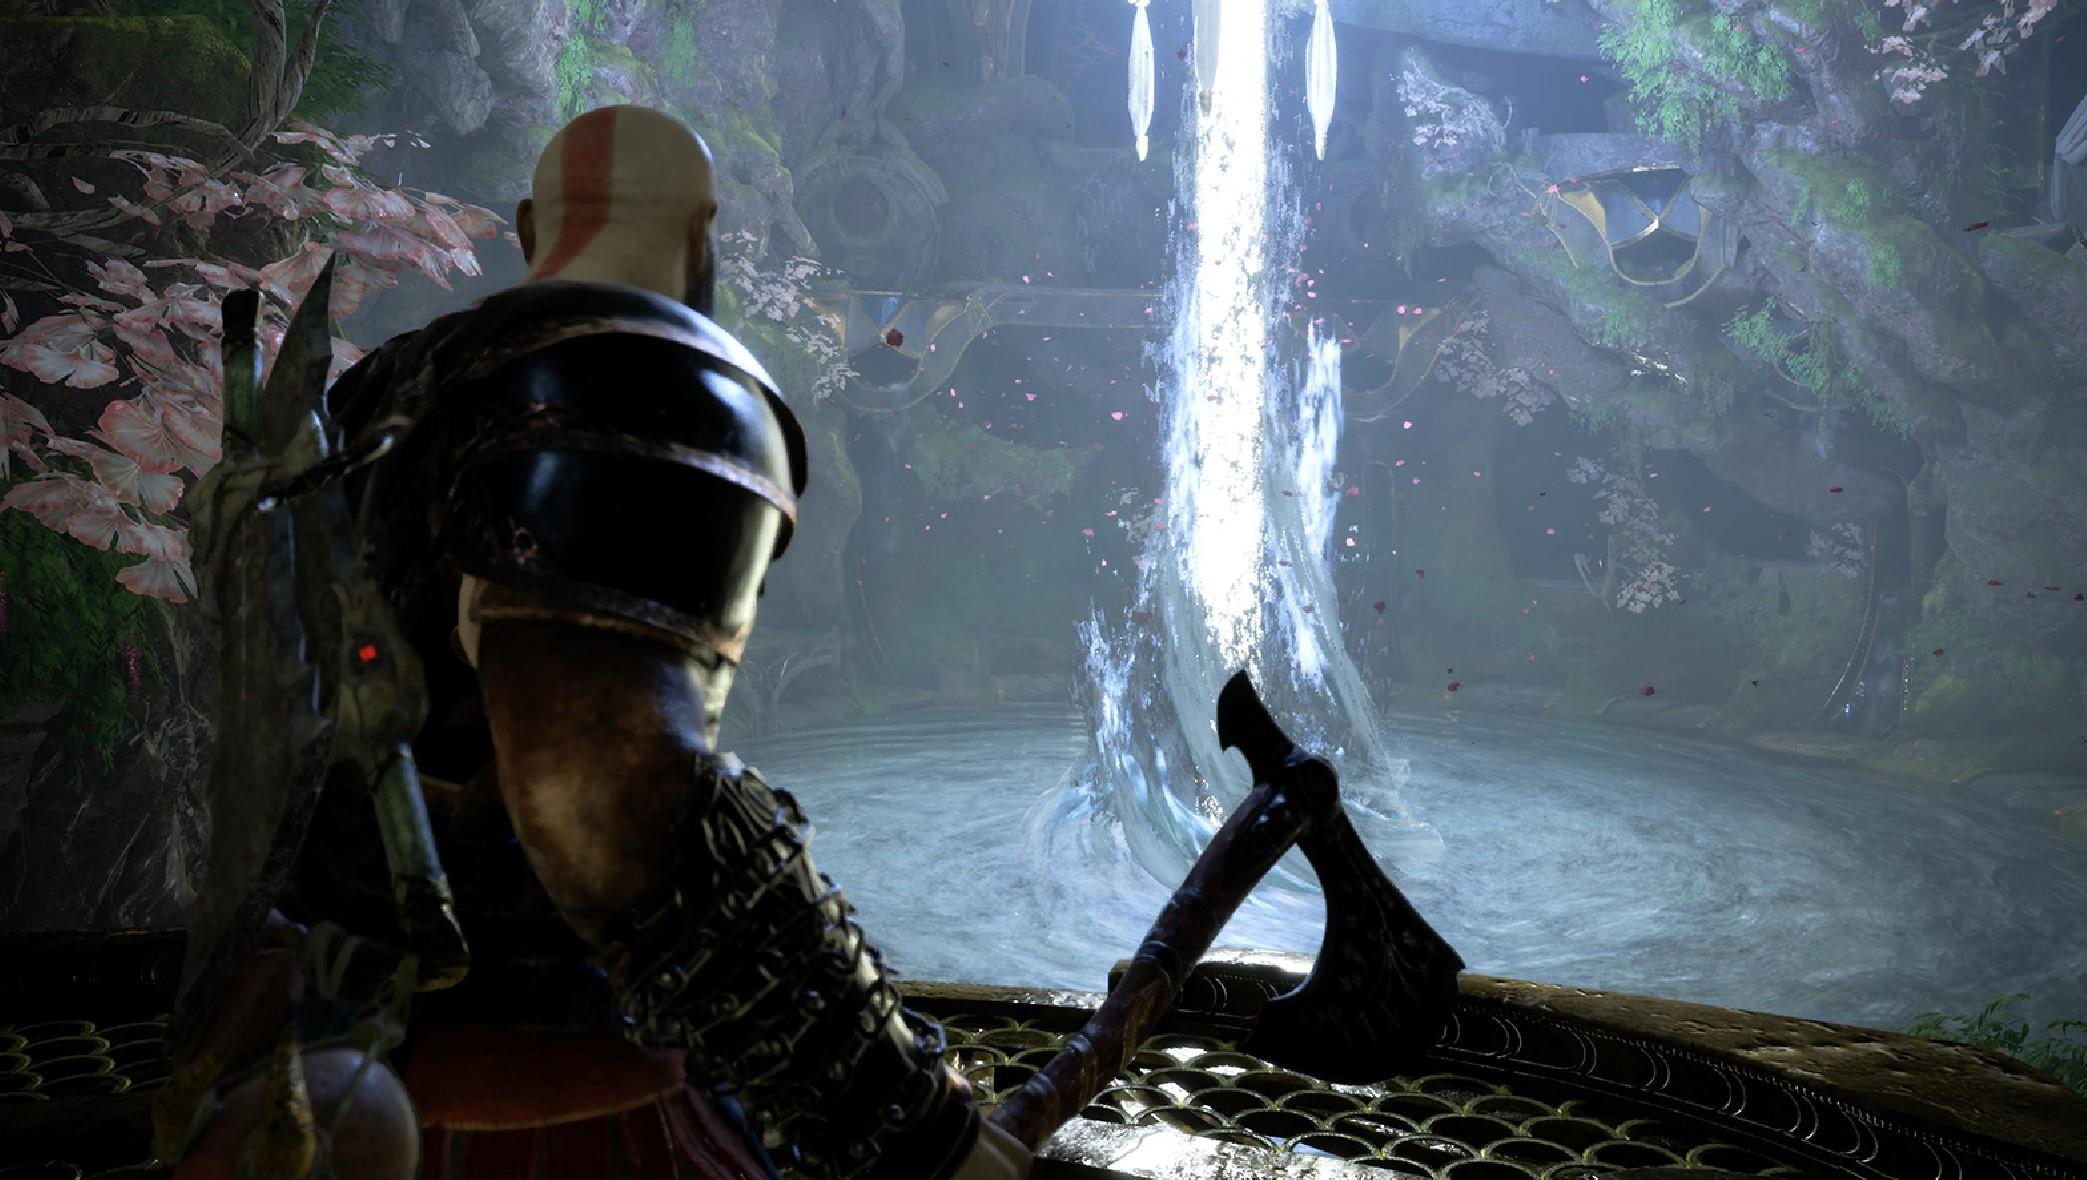 5 Must-Play Games for Every God of War Fan After Finishing Ragnarok